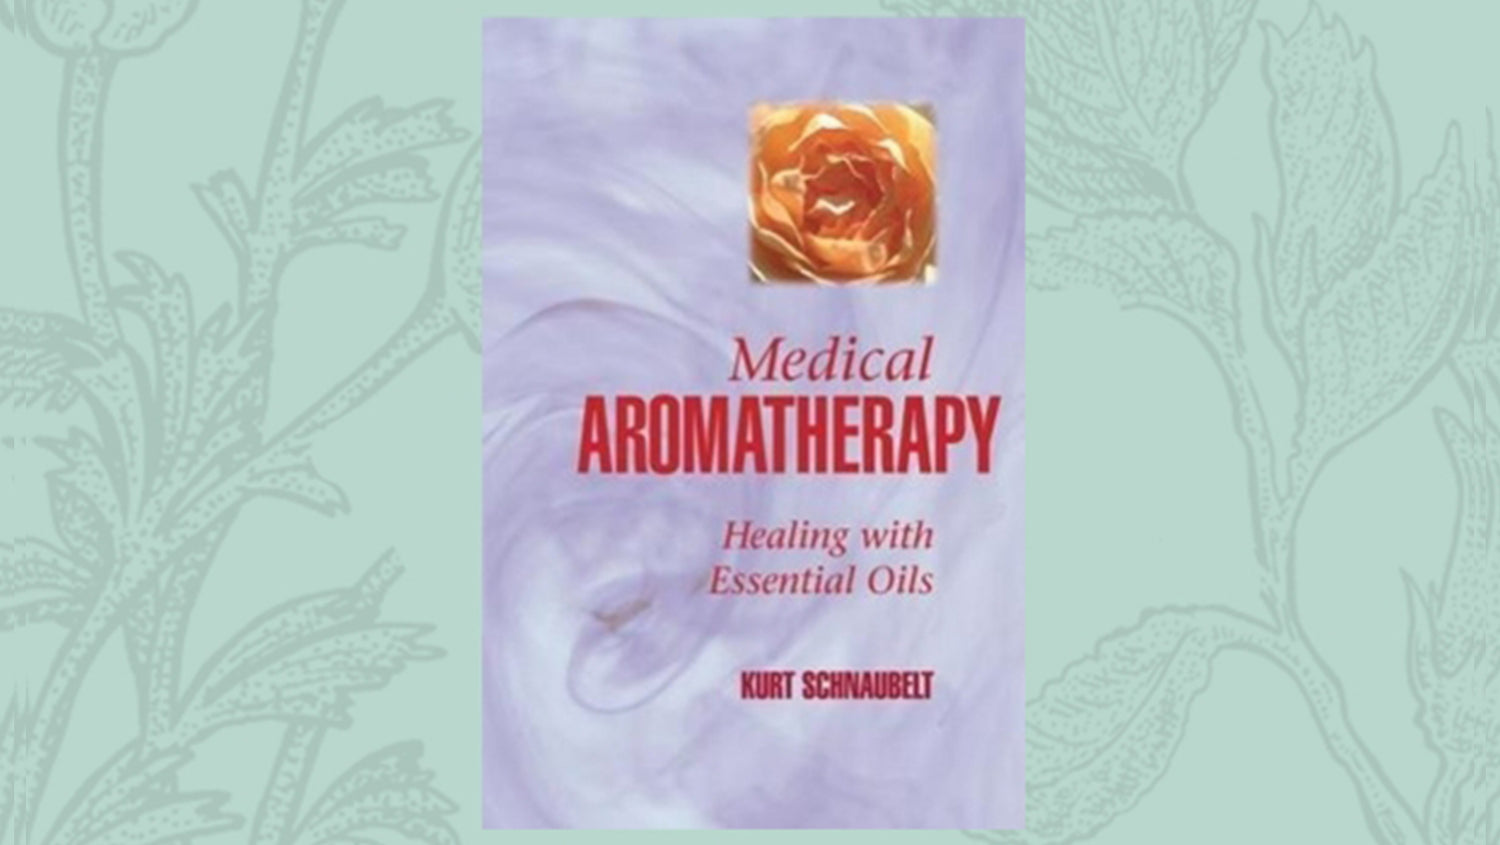 Medical Aromatherapy – Healing with Essential Oils